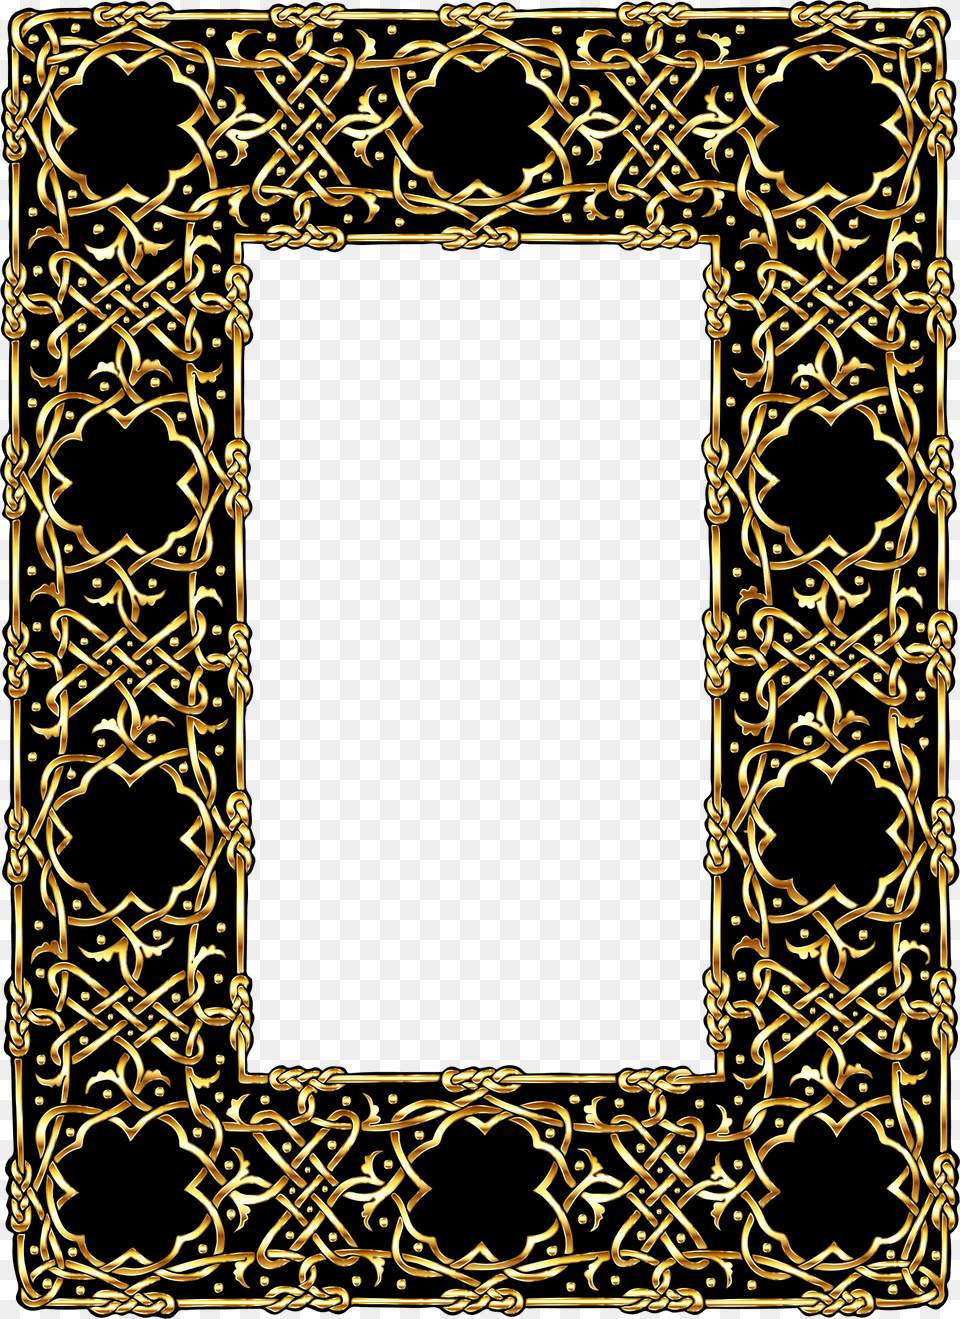 Celtic Knot Picture Frames Borders And Frames Ornament, Home Decor, Rug, Crib, Furniture Free Png Download